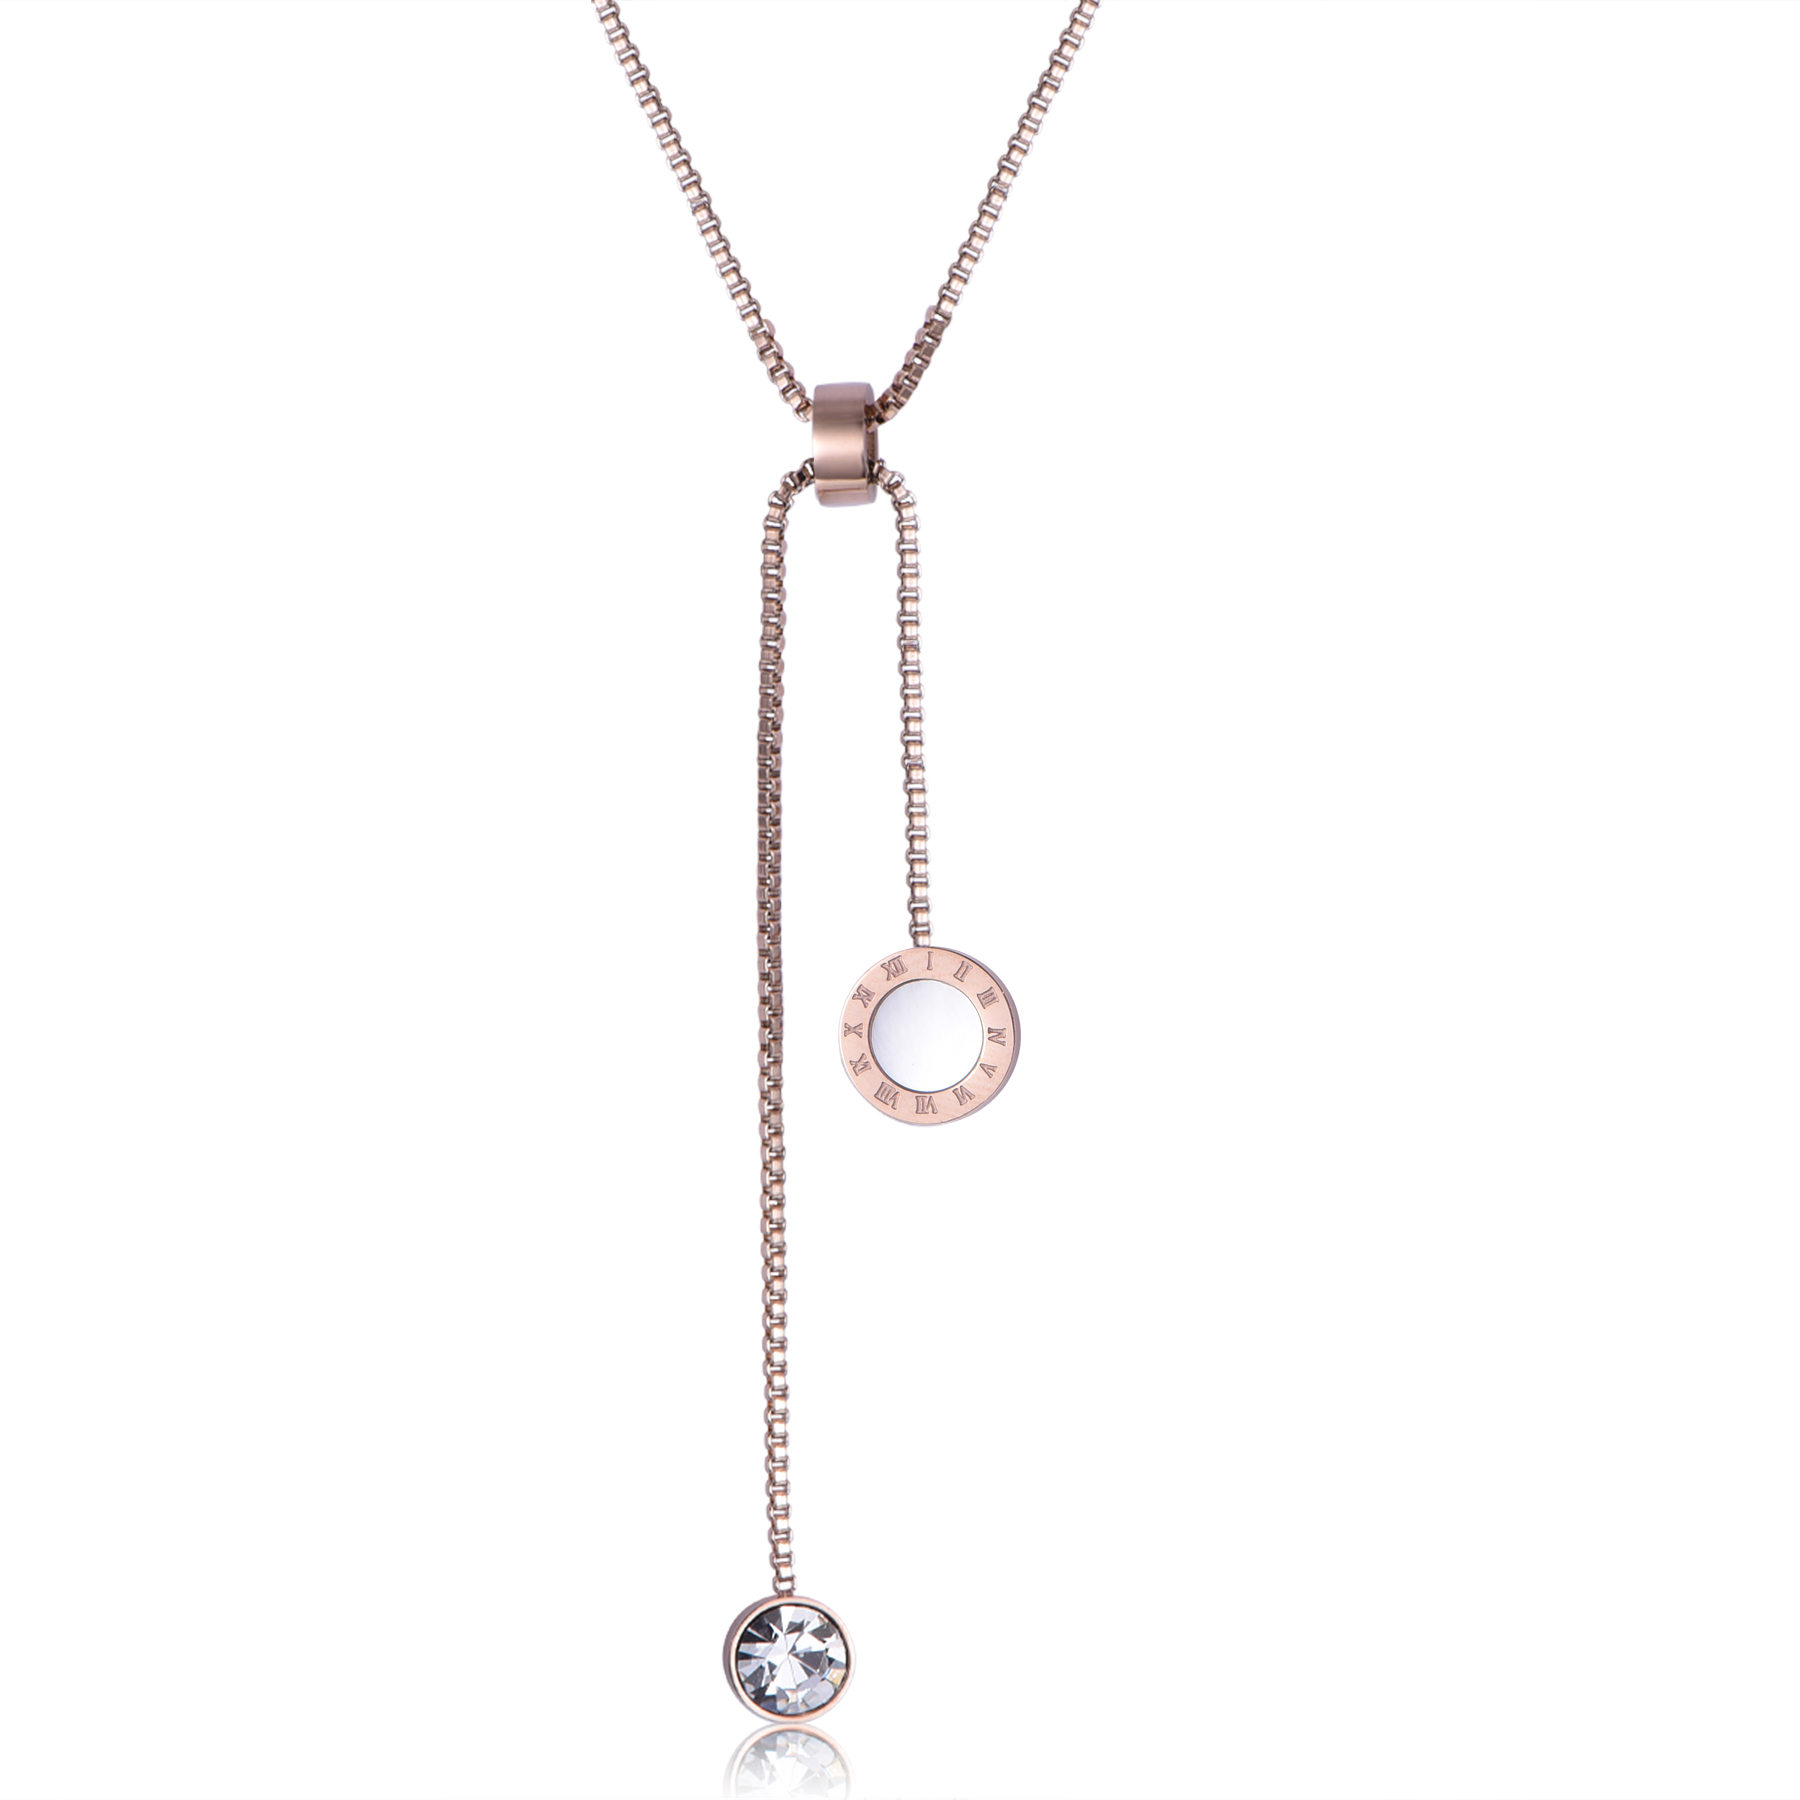 Stainless Steel Zircon Shell Chain Necklace NR7-10